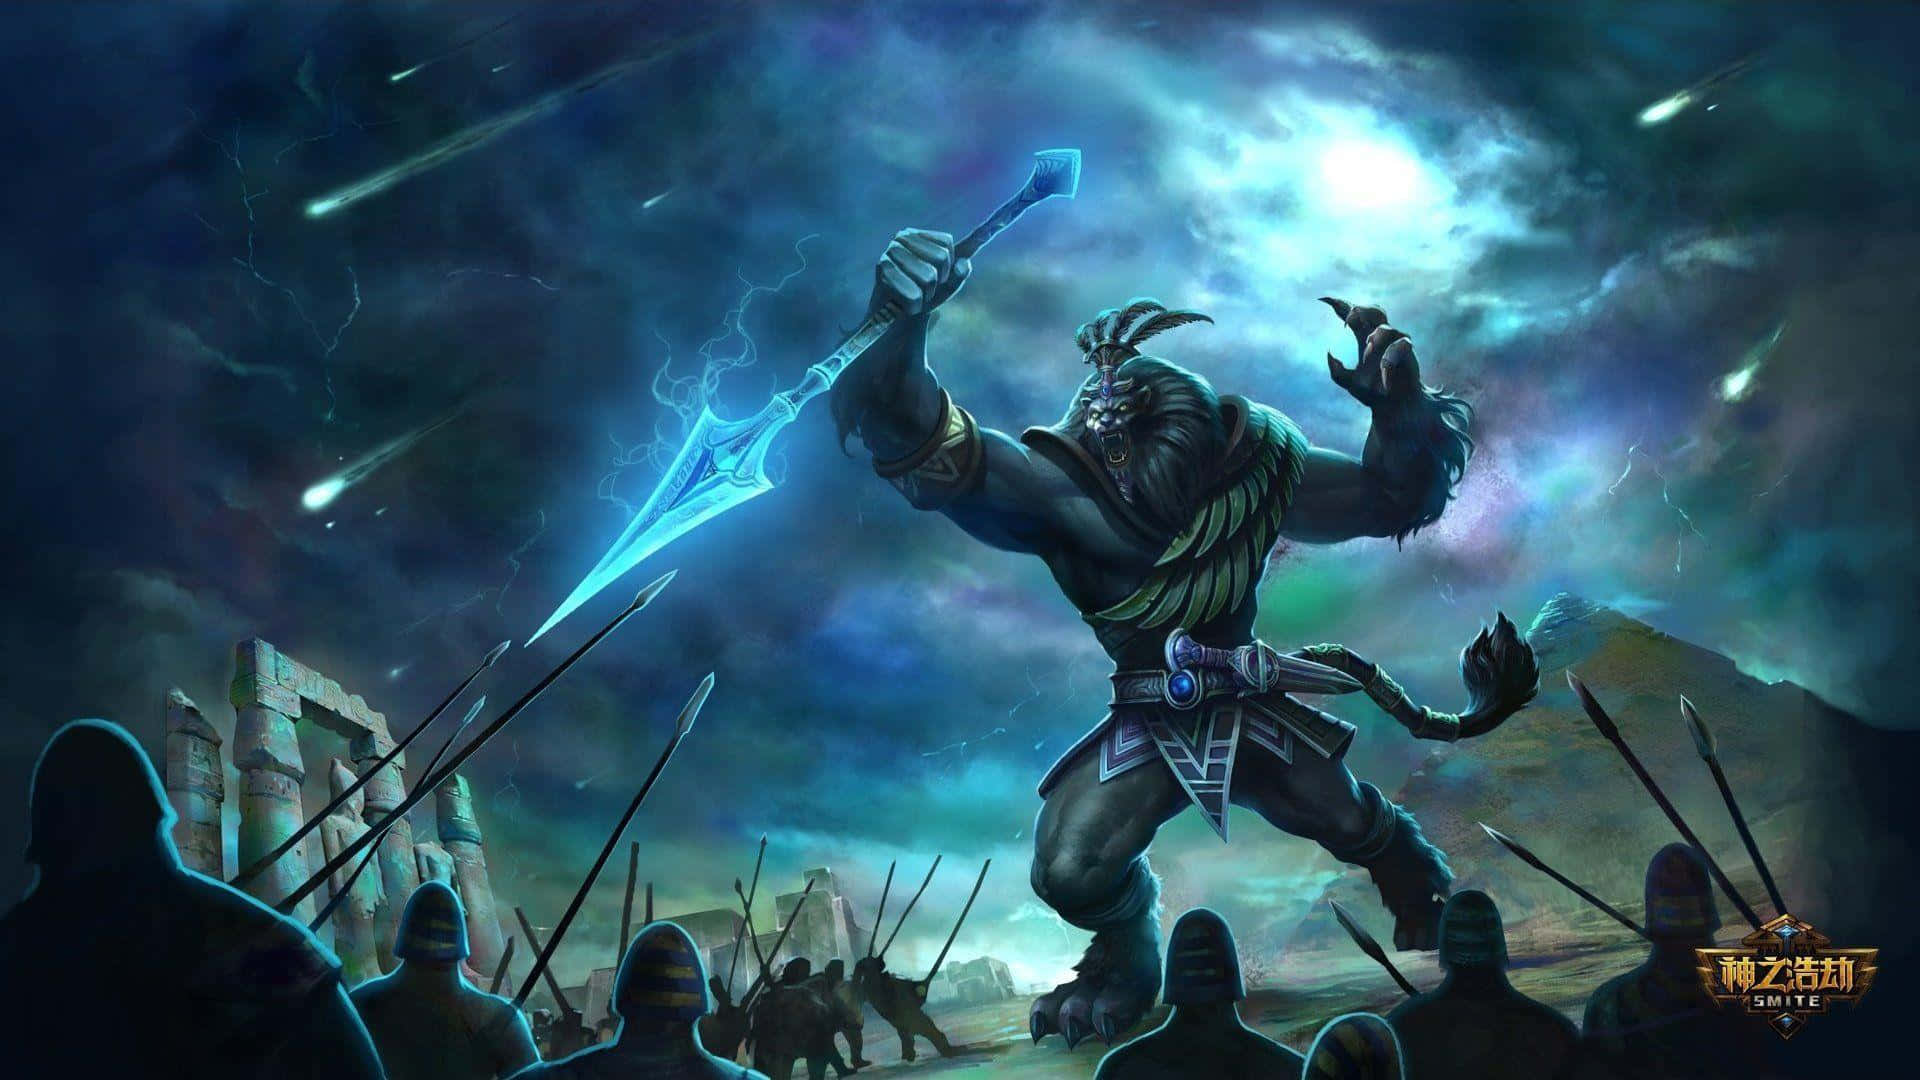 Experience The Epic Battle Between Gods And Mortals In Smite Wallpaper